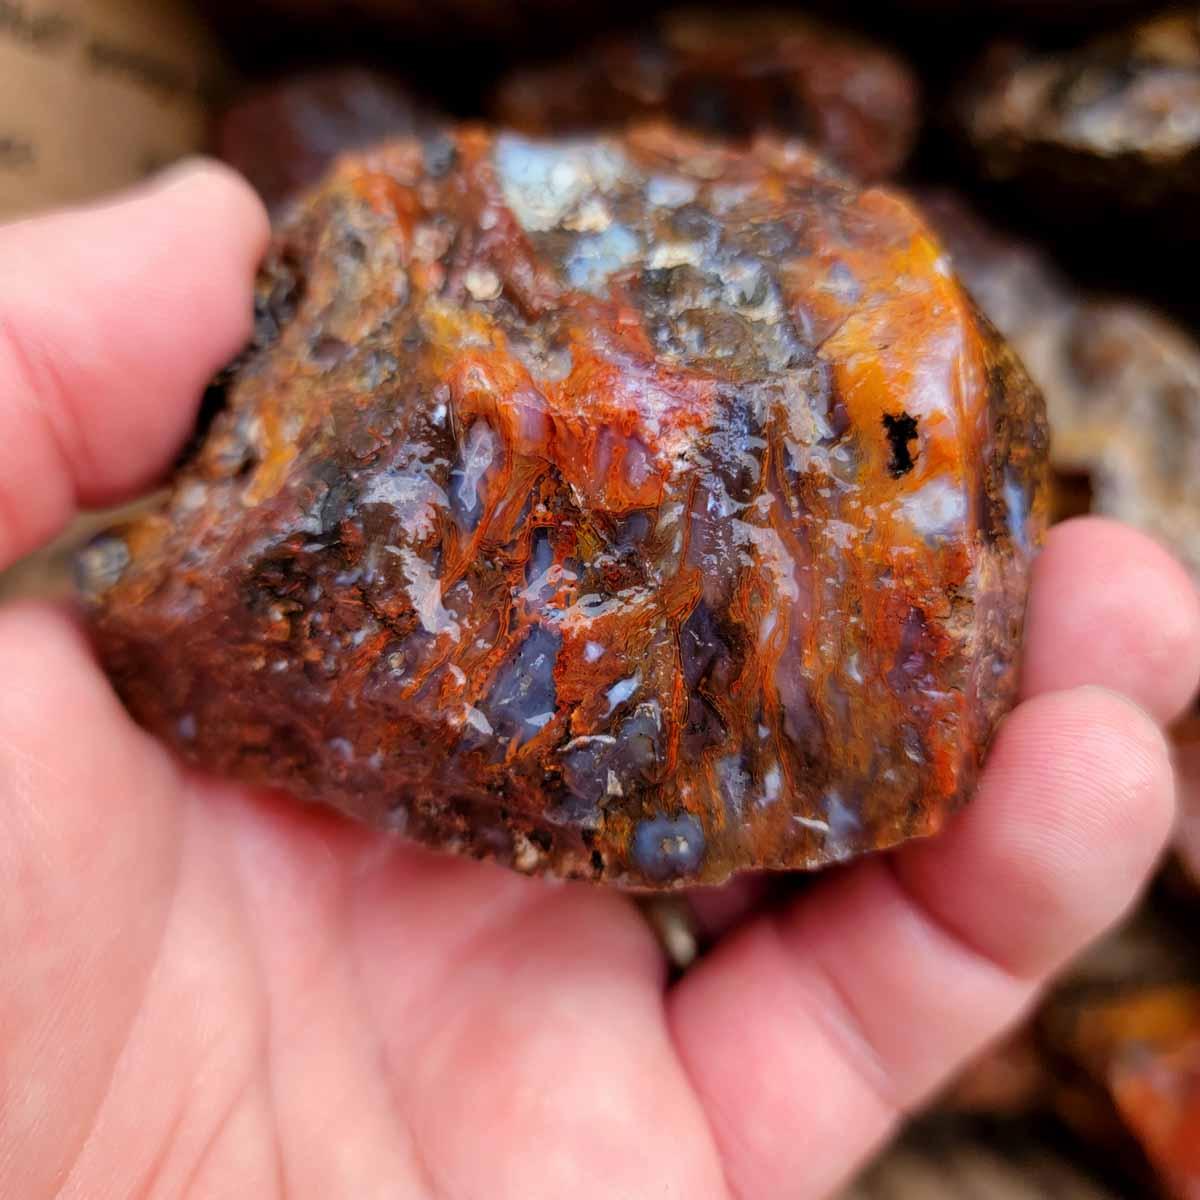 New San Carlos Moss Agate Lapidary Cutting Rough Flatrate! - Lapidary Central